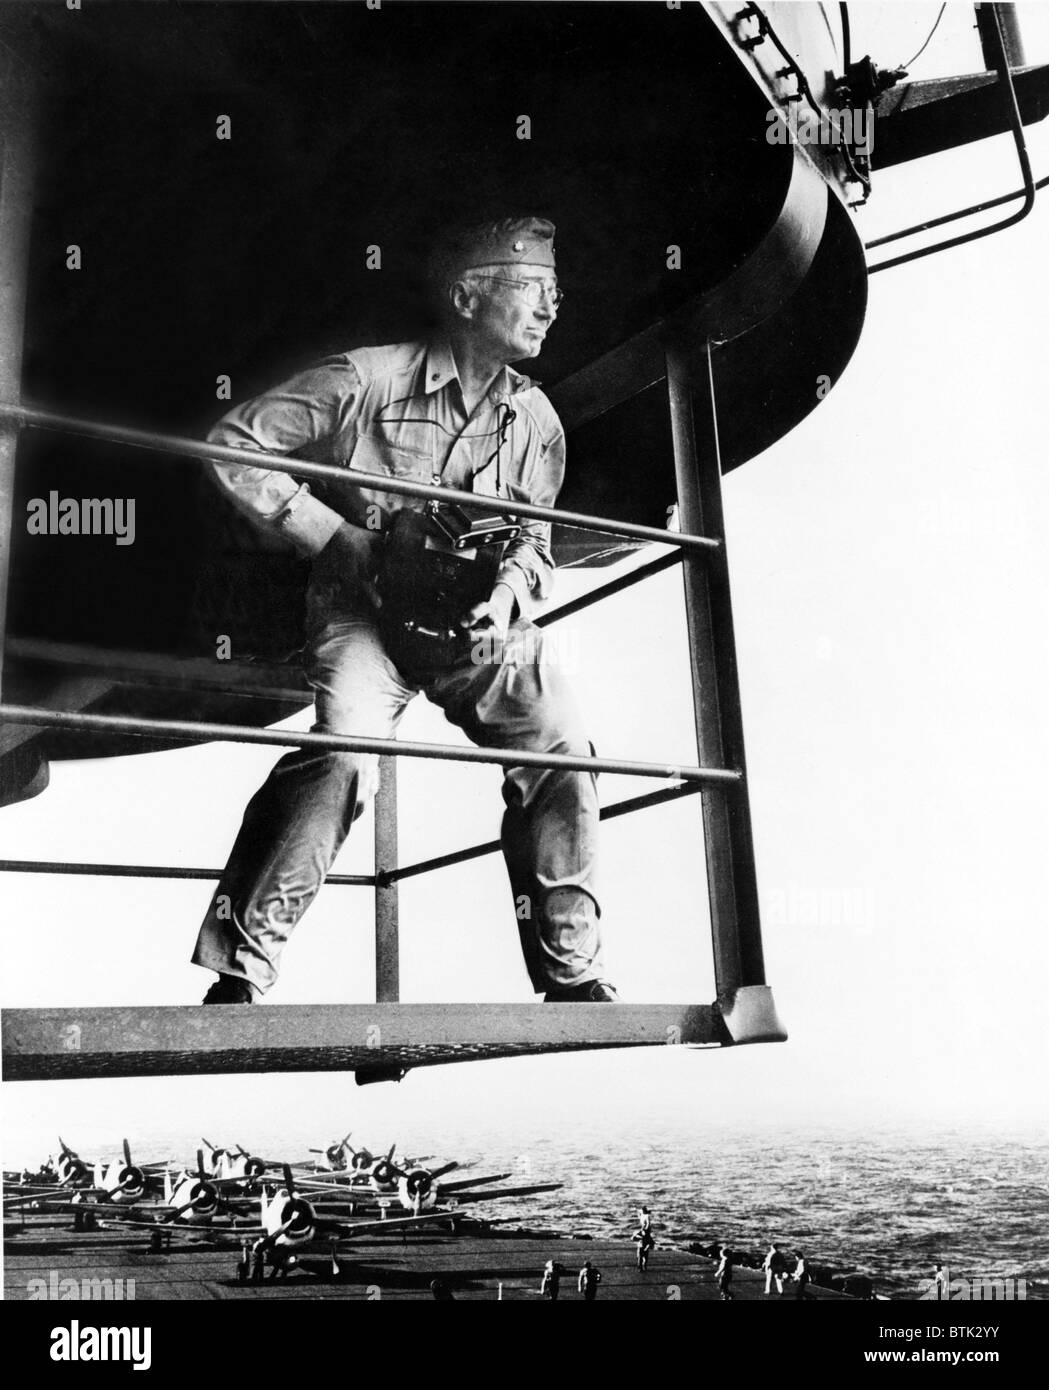 Lt. Commander Edward Steichen (1879-1973) holding camera, standing on aircraft carrier during WWII in 1945. His photographic career started in the pictorialist style; evolved to dramatic fashion photography and portraiture in the 1930. He assumed leadership of US Naval photographic units during World War II. Stock Photo